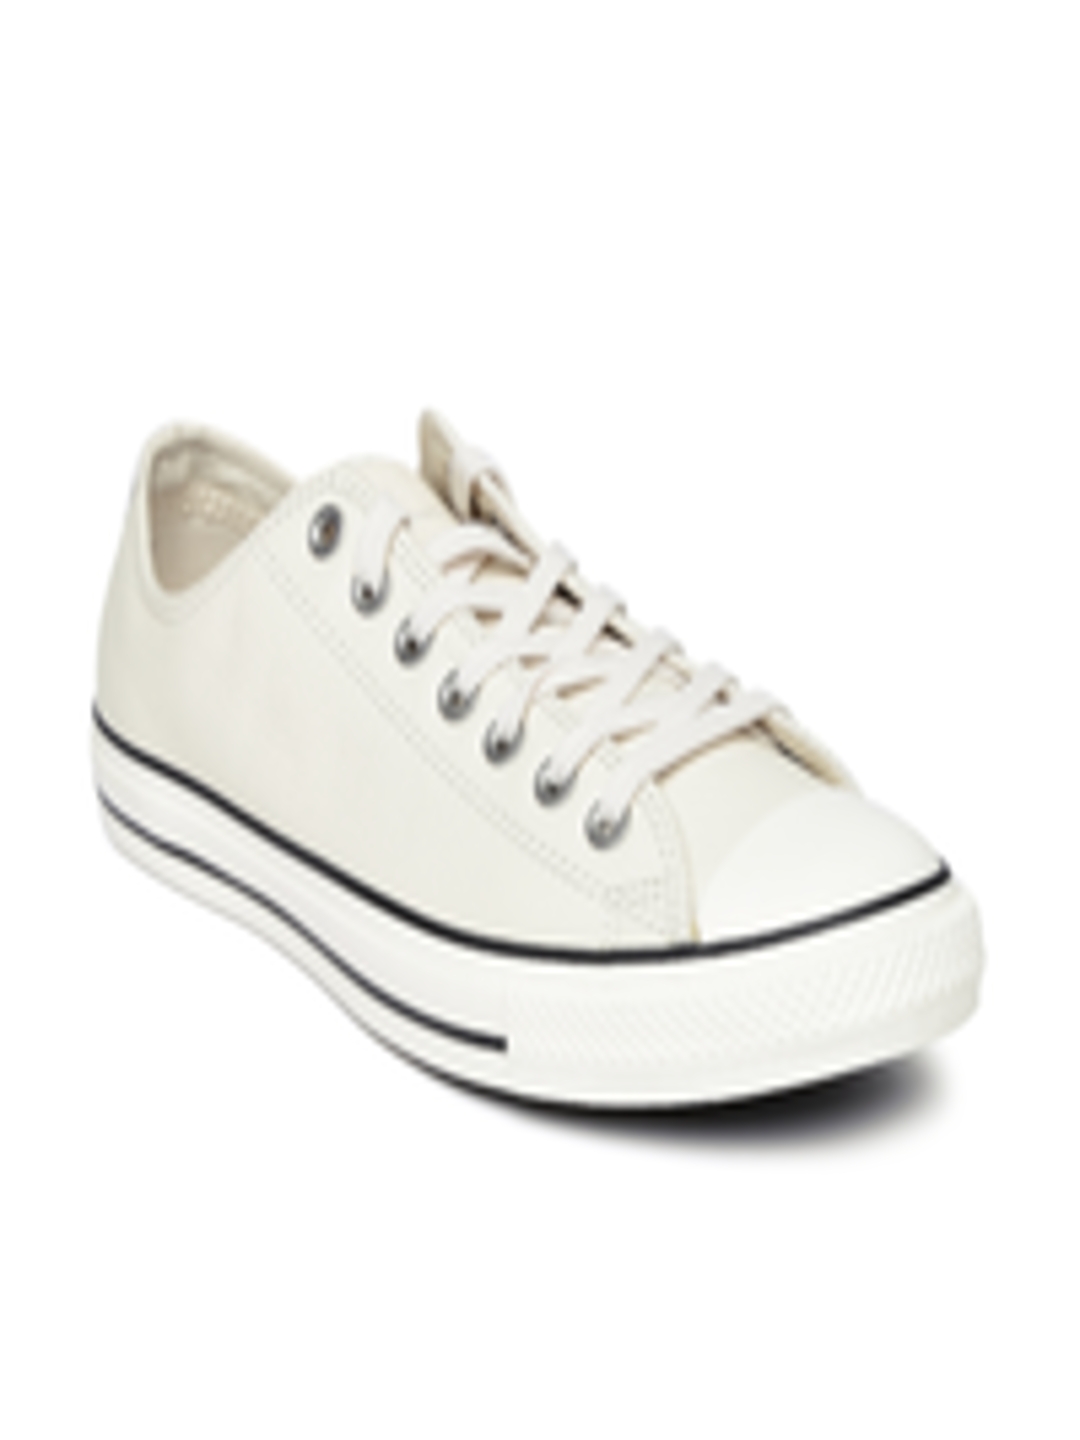 Buy Converse Unisex Off White Leather Sneakers - Casual Shoes for ...